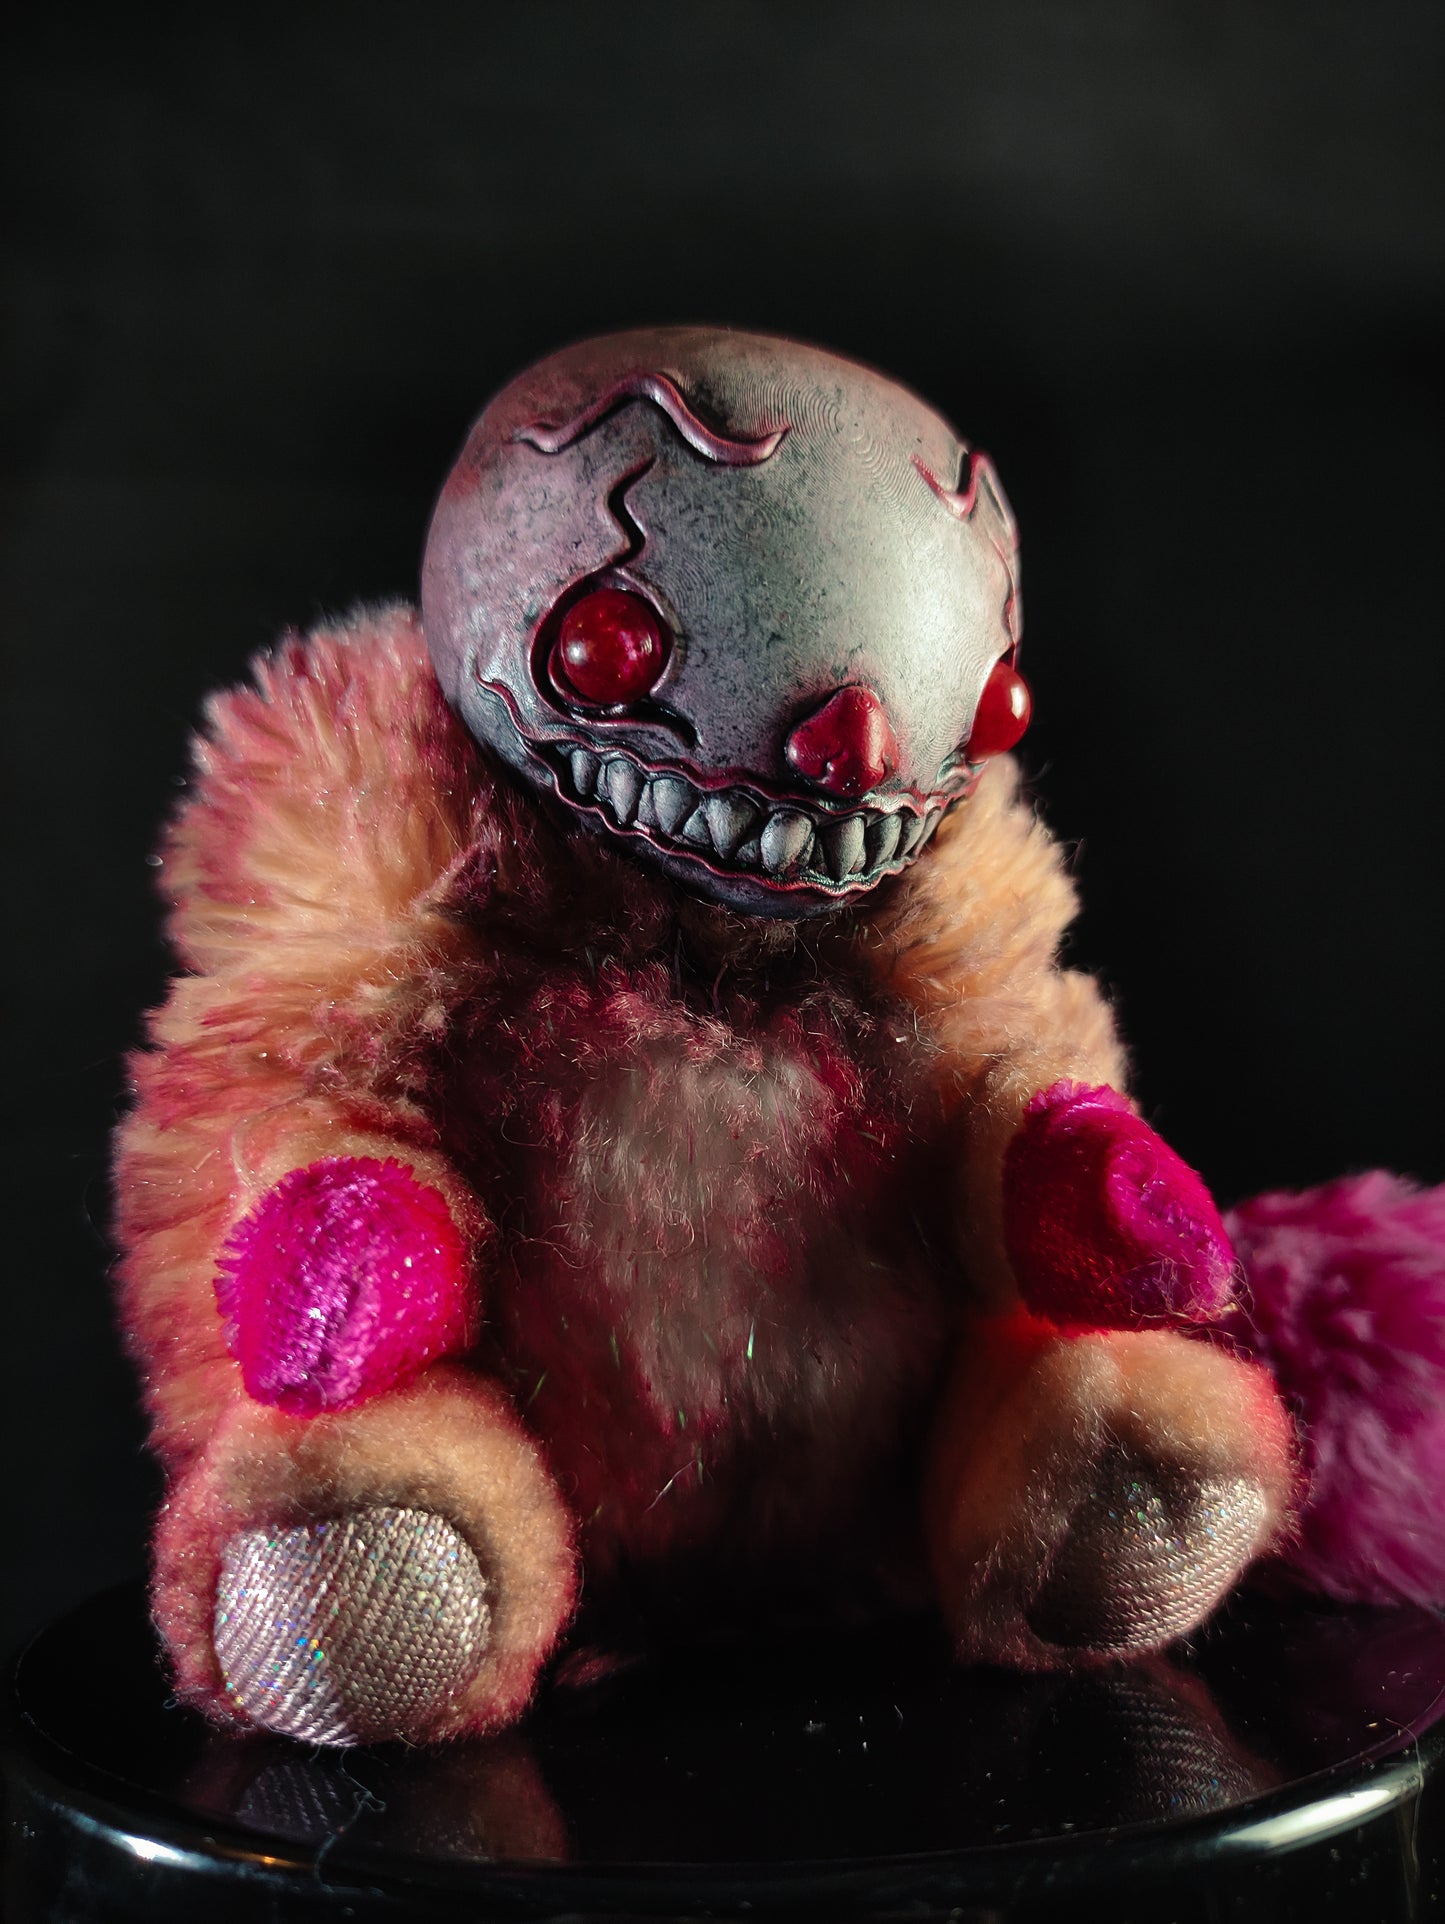 FRIEND² Pantomime Punch - Cryptid Art Doll Plush Toy